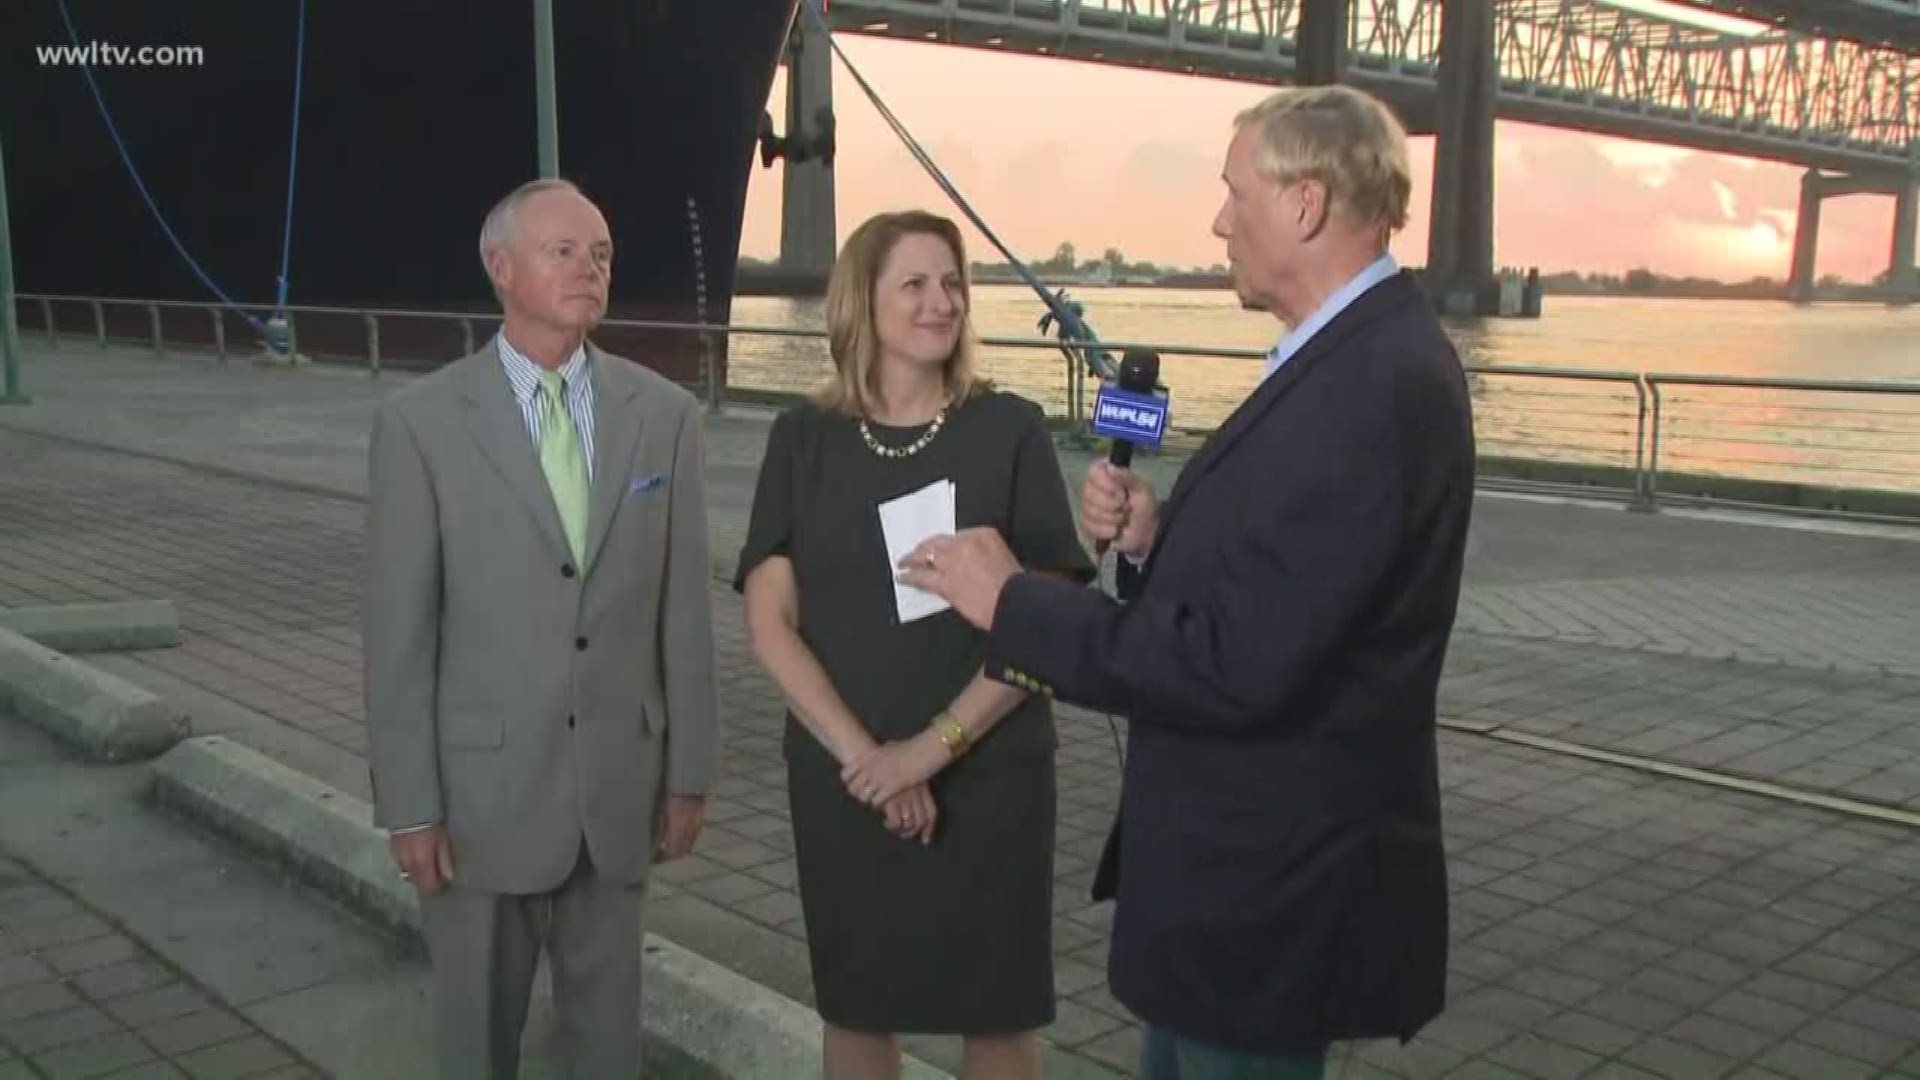 Eric Paulsen is live at the Port of New Orleans for National Maritime Day, discussing the importance of the port for the local economy with Port NOLA CEO Brandy Christian and Avondale Marine Commercial Director Jeff Keever to talk about the future of Avondale Shipyard and its role in port traffic.